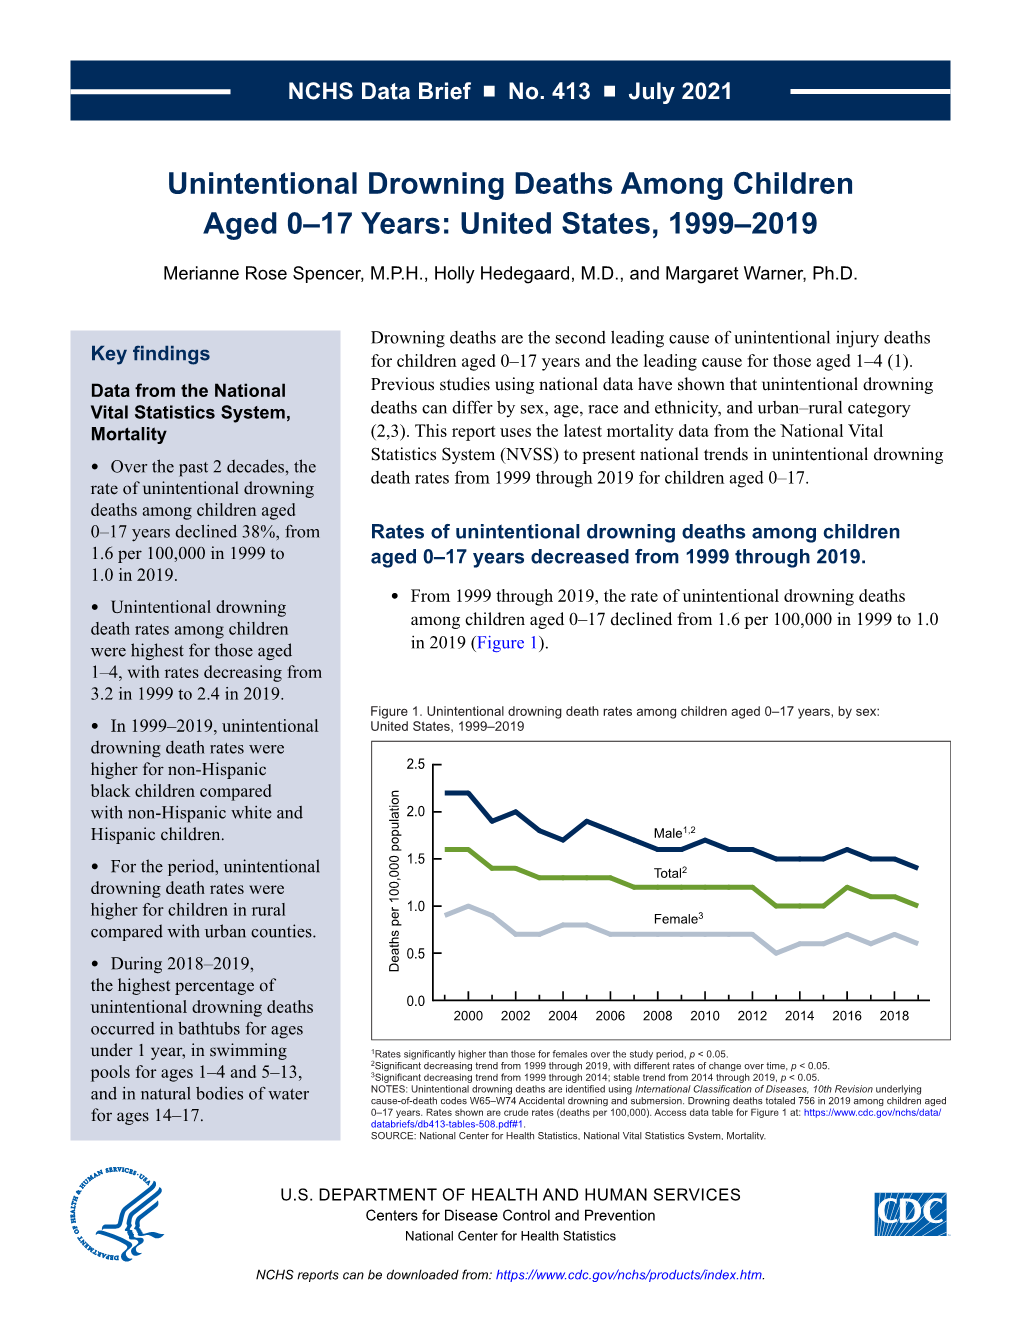 Unintentional Drowning Deaths Among Children Aged 0–17 Years: United States, 1999–2019